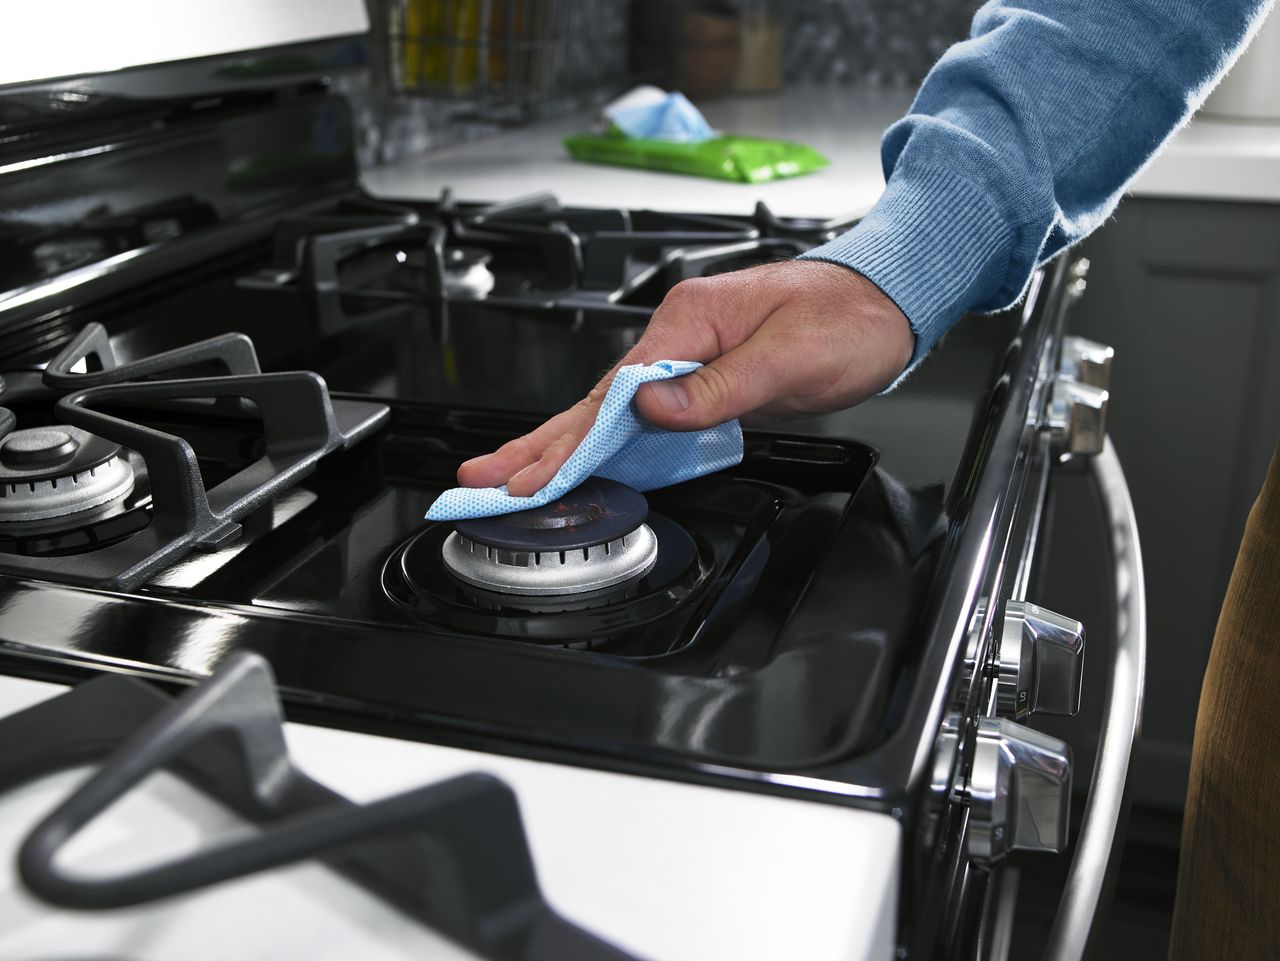 I dripped on the stove burner and never had that problem again!, stove, I  dripped on the stove burner and never had that problem again!, By Bezerra  good Tips